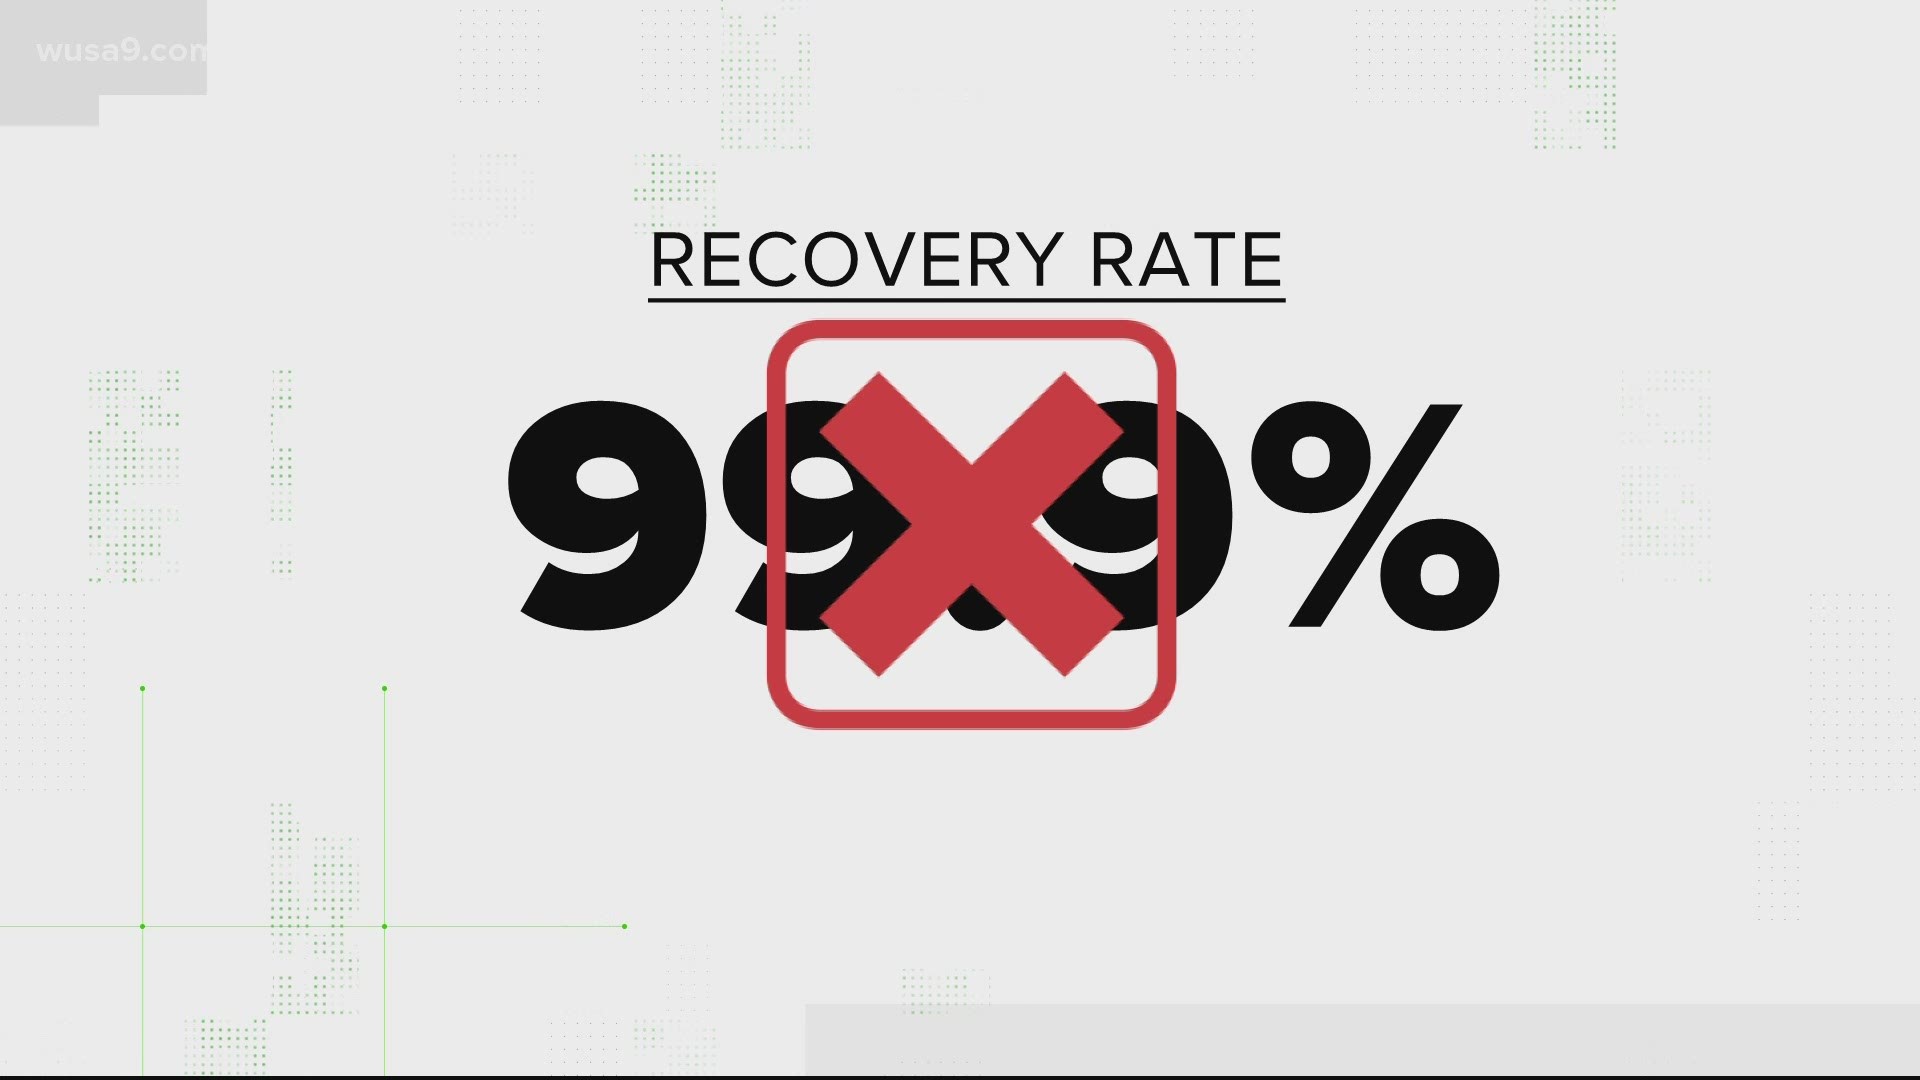 Many online claims report the recovery rate from the disease is incredibly high: 99.9%. But, it's false.